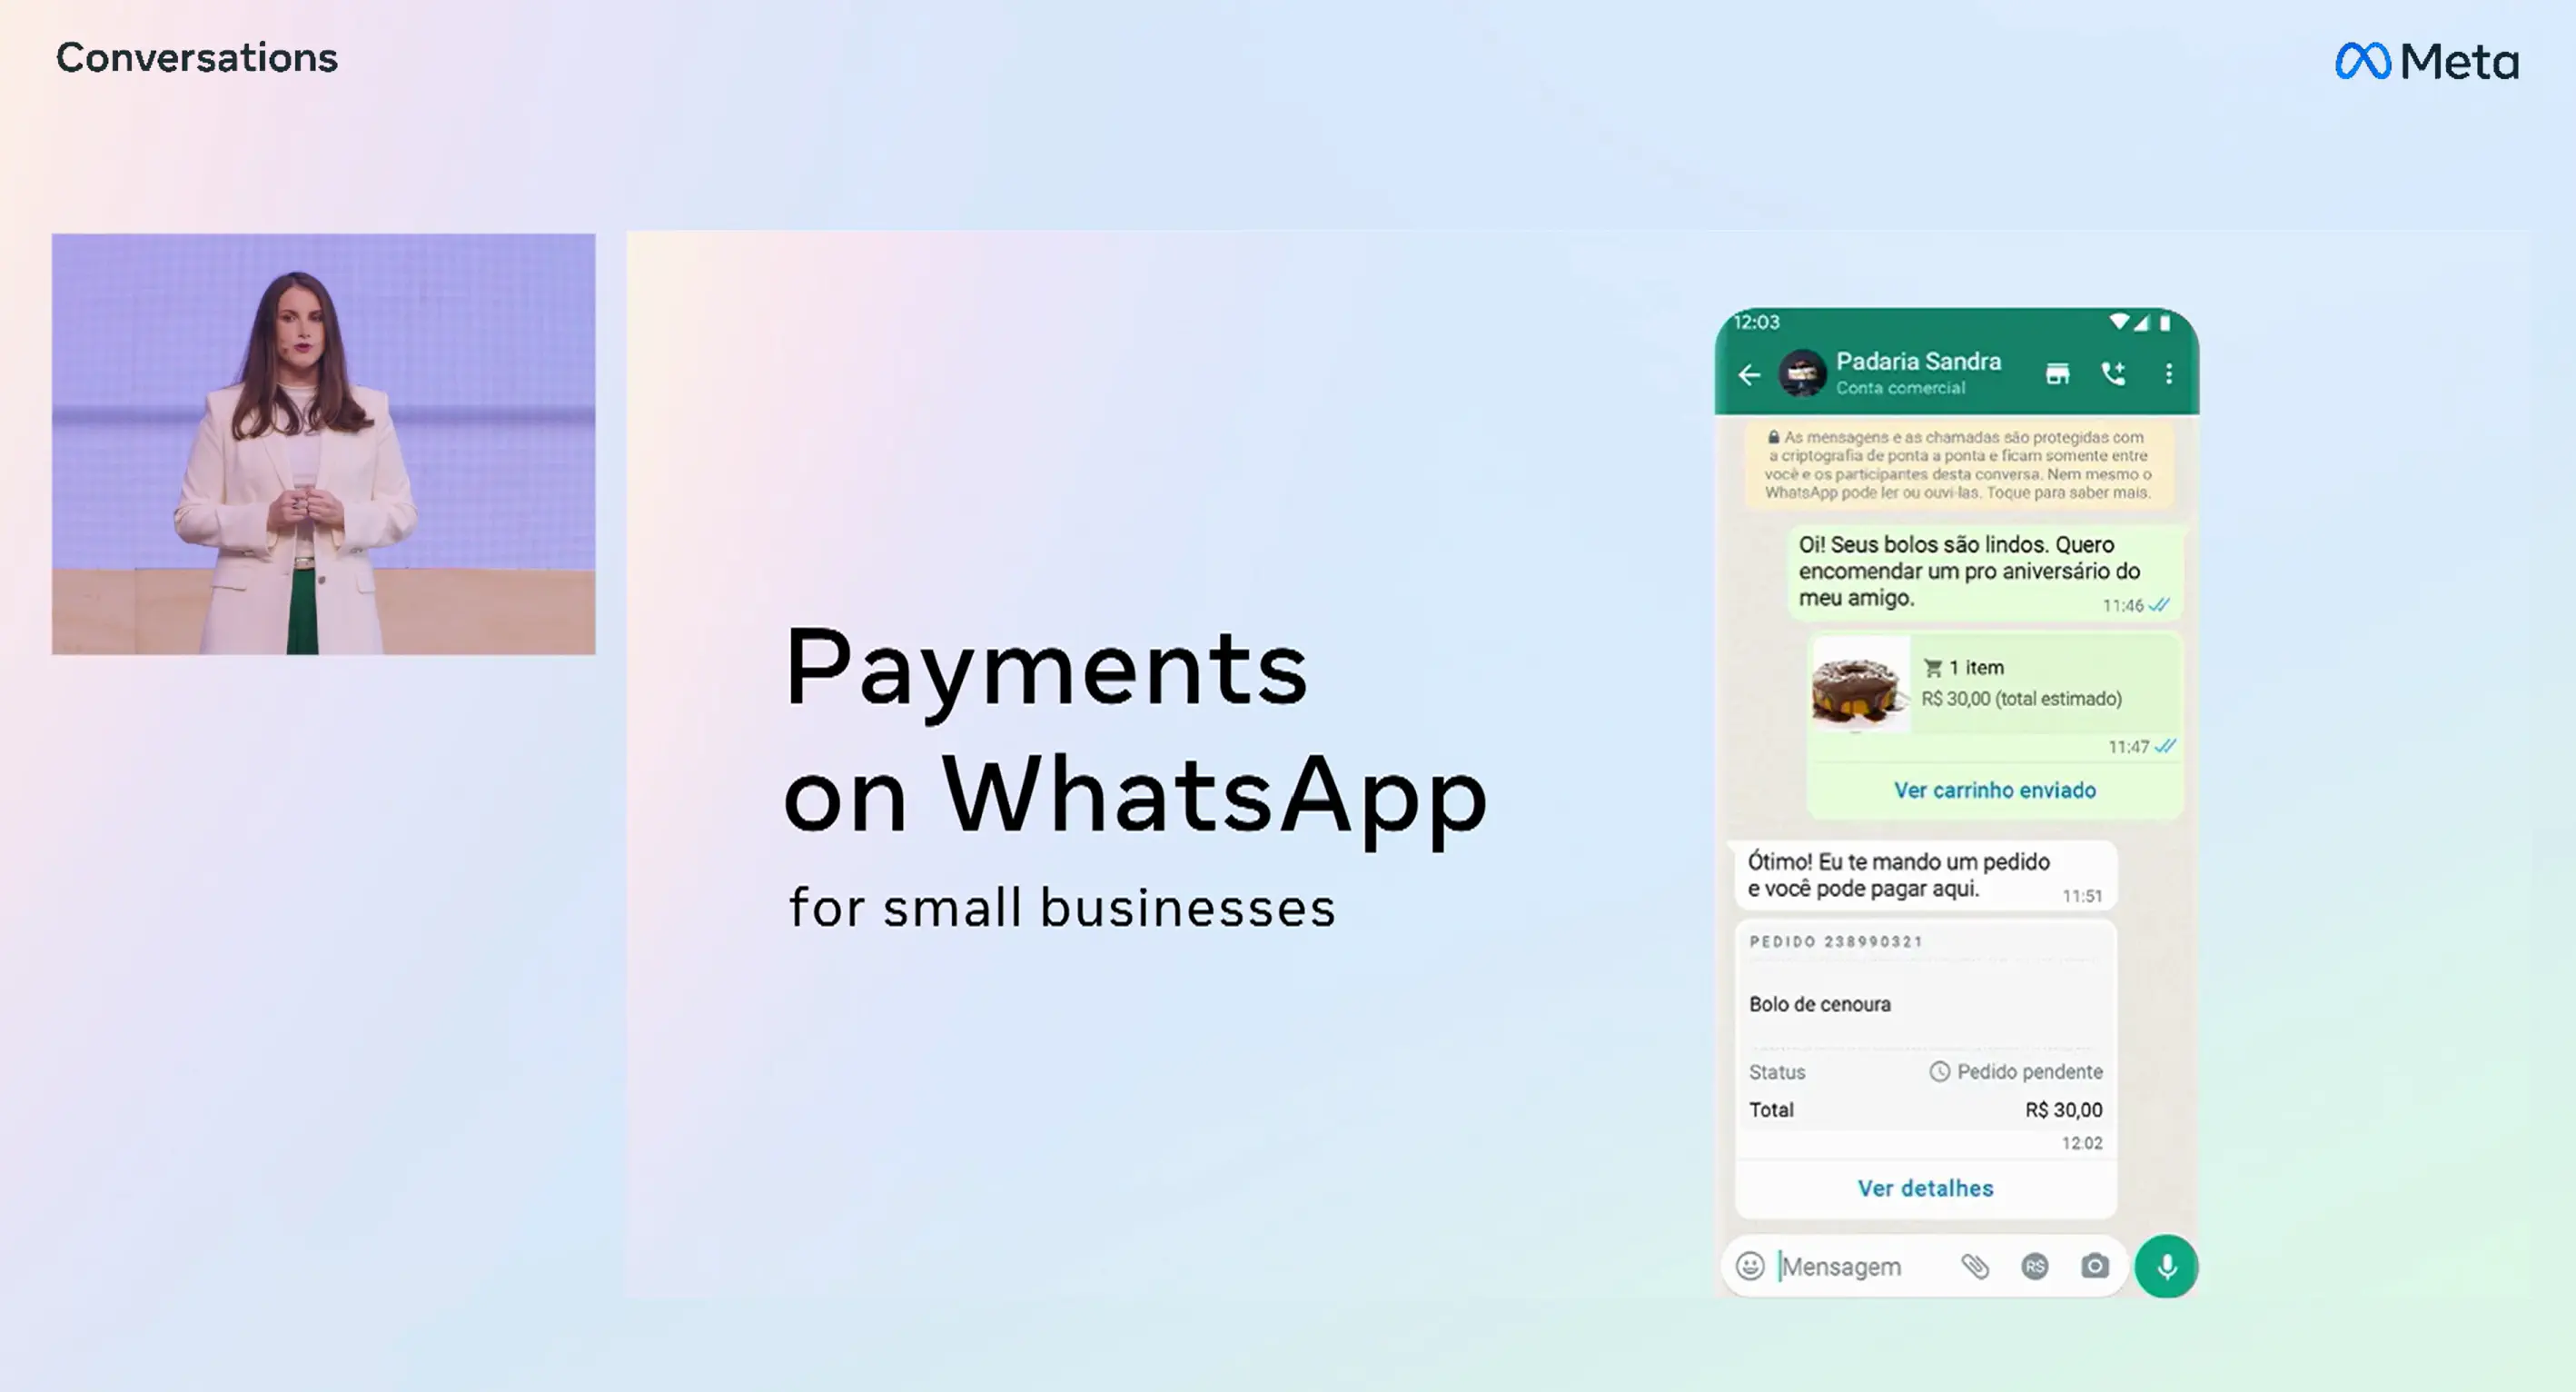 Payments for small businesses on WhatsApp